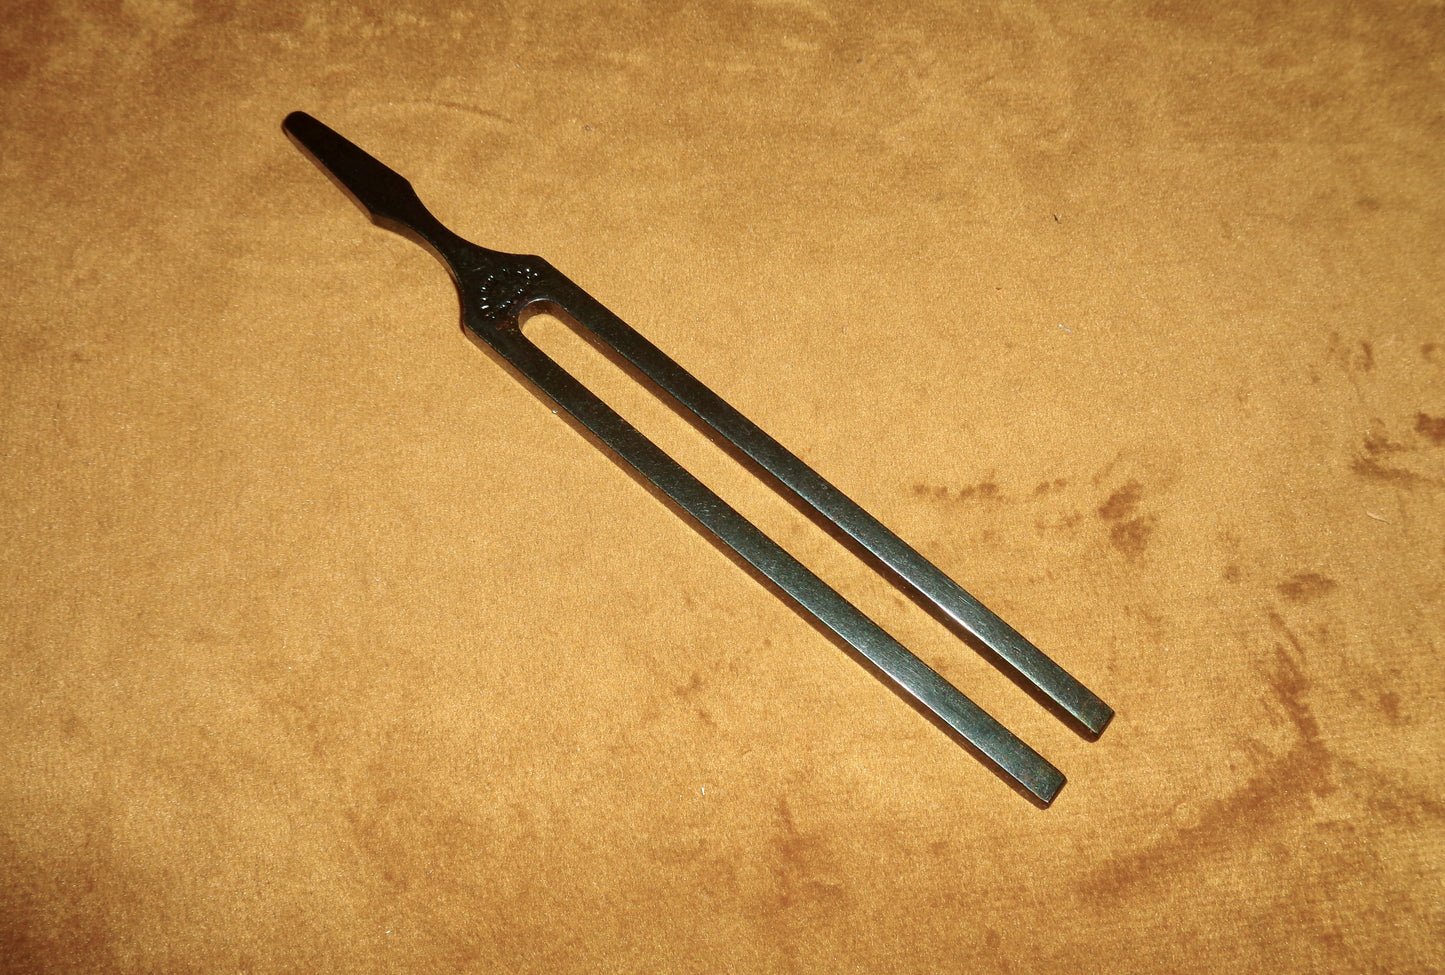 Preowned John Walker Tuning Fork G Frequency 392Hz